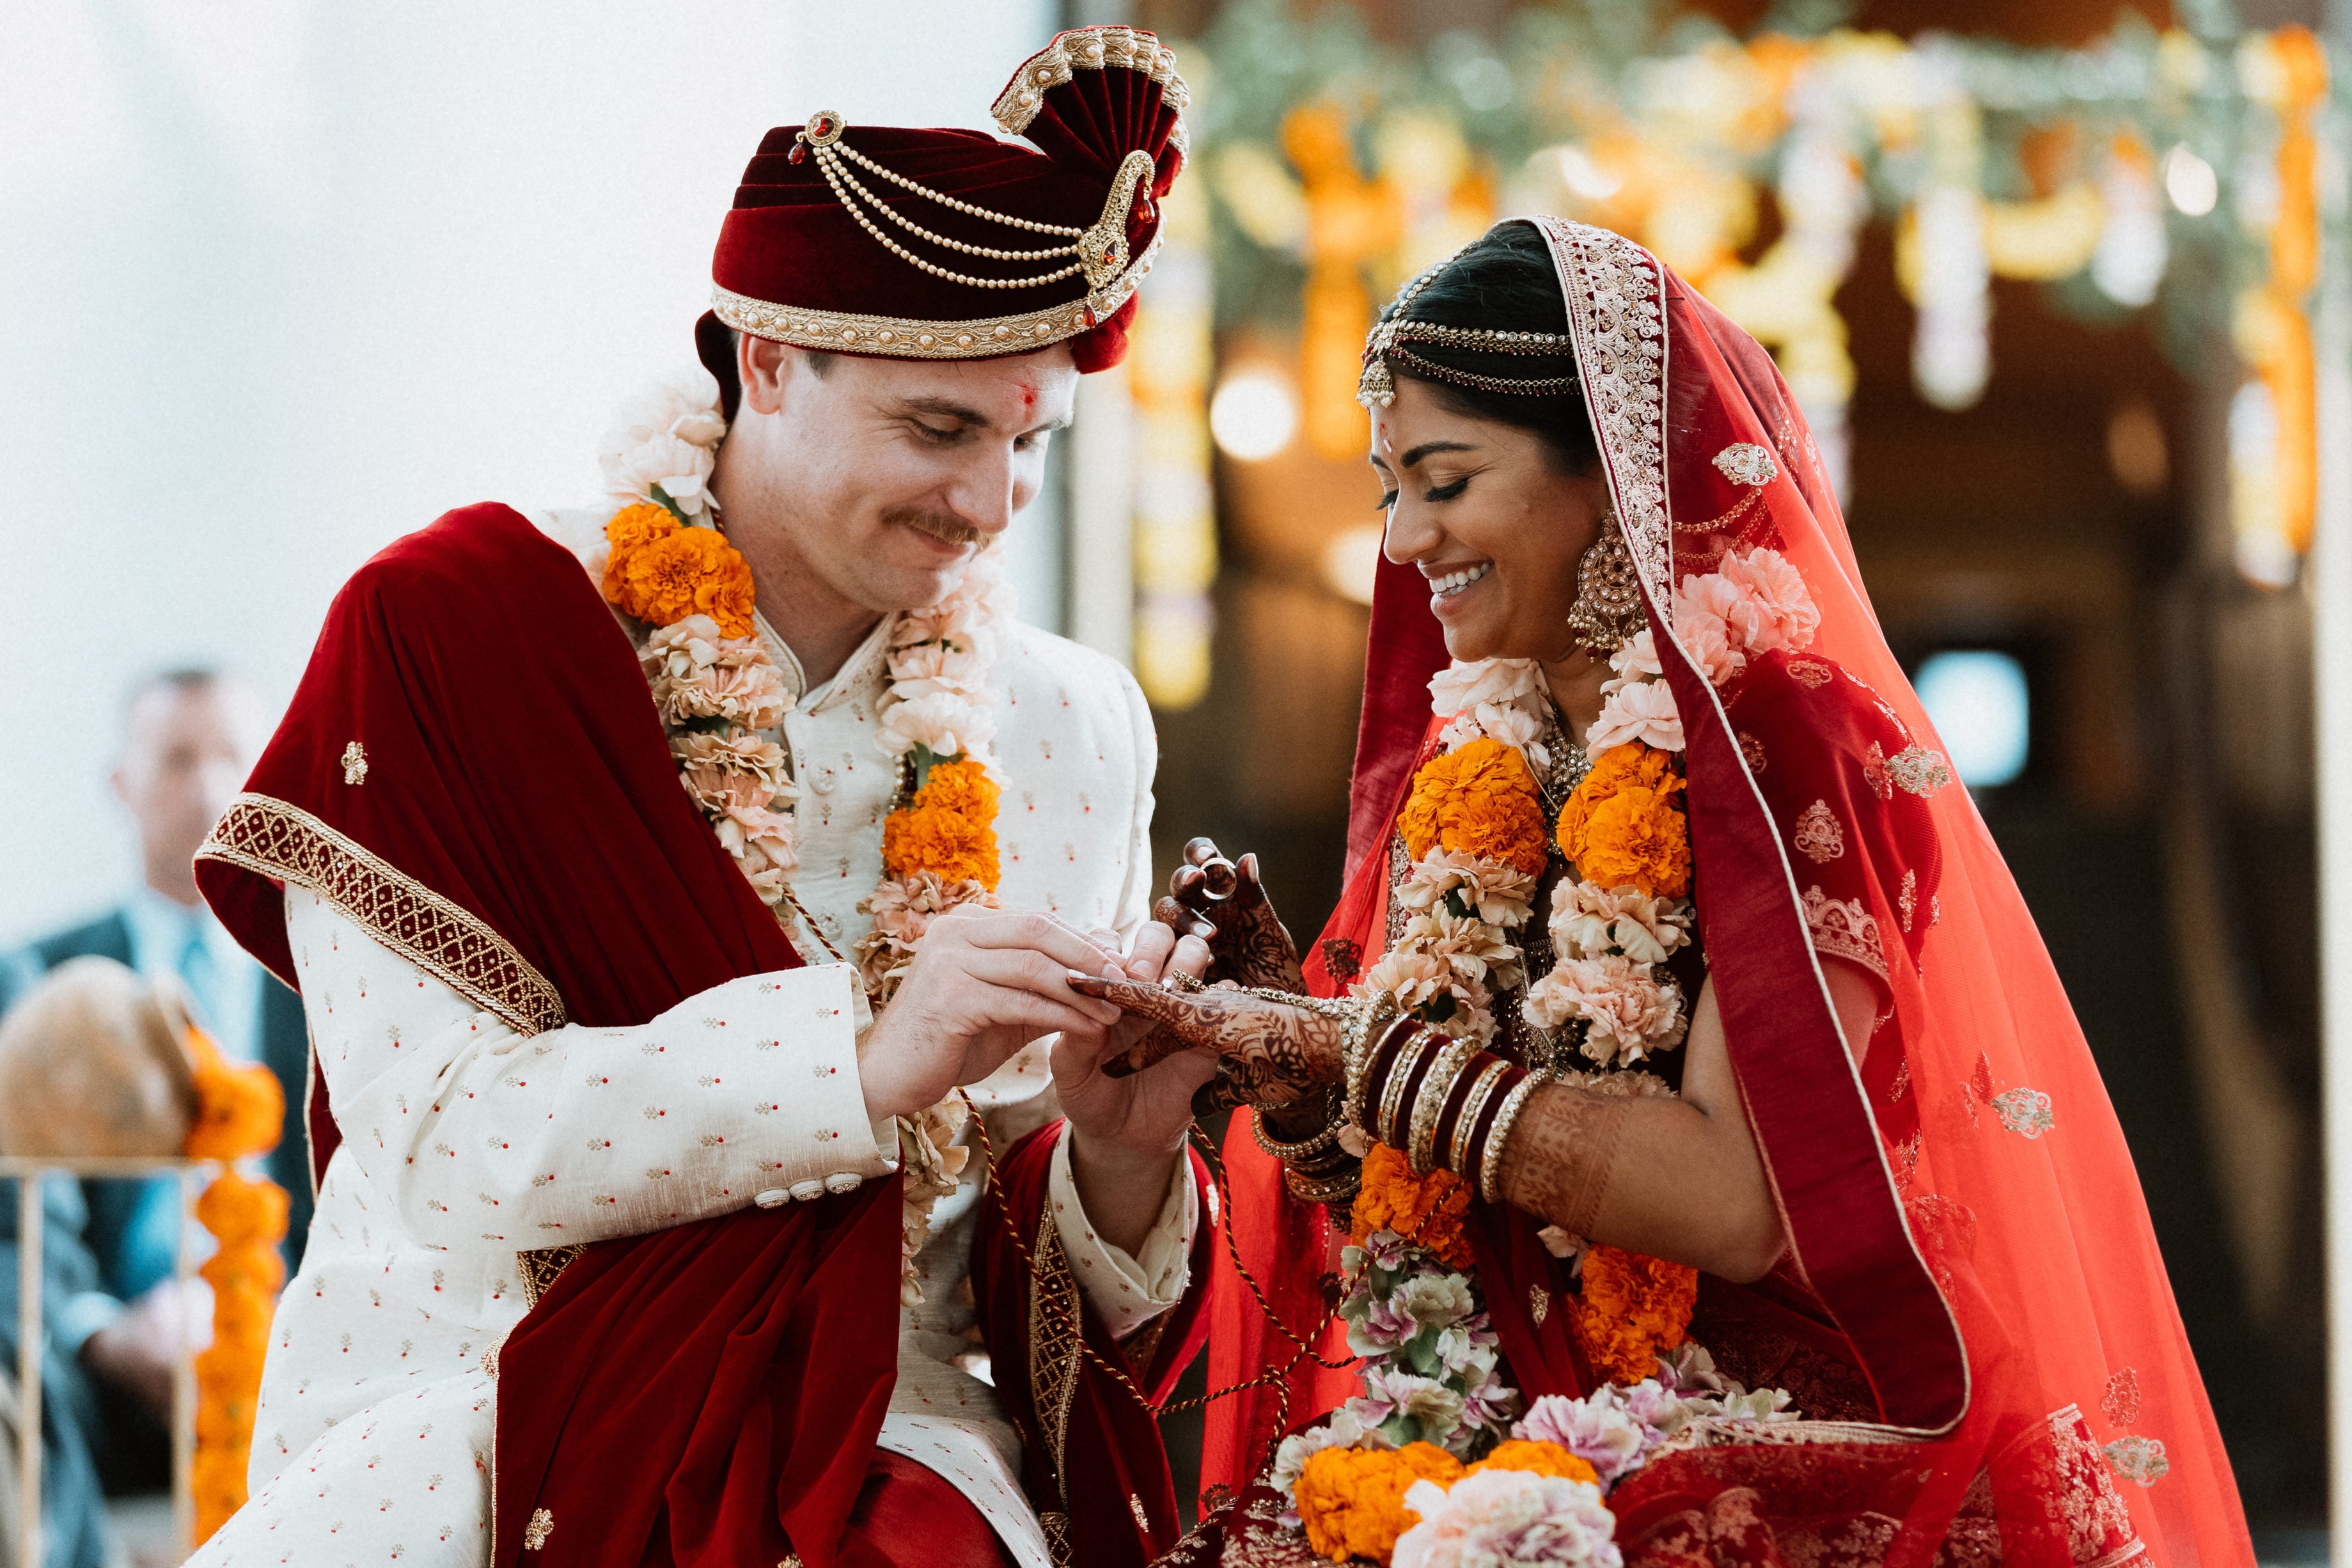 Riddhi and Brennon Cain exchange rings during their wedding ceremony.